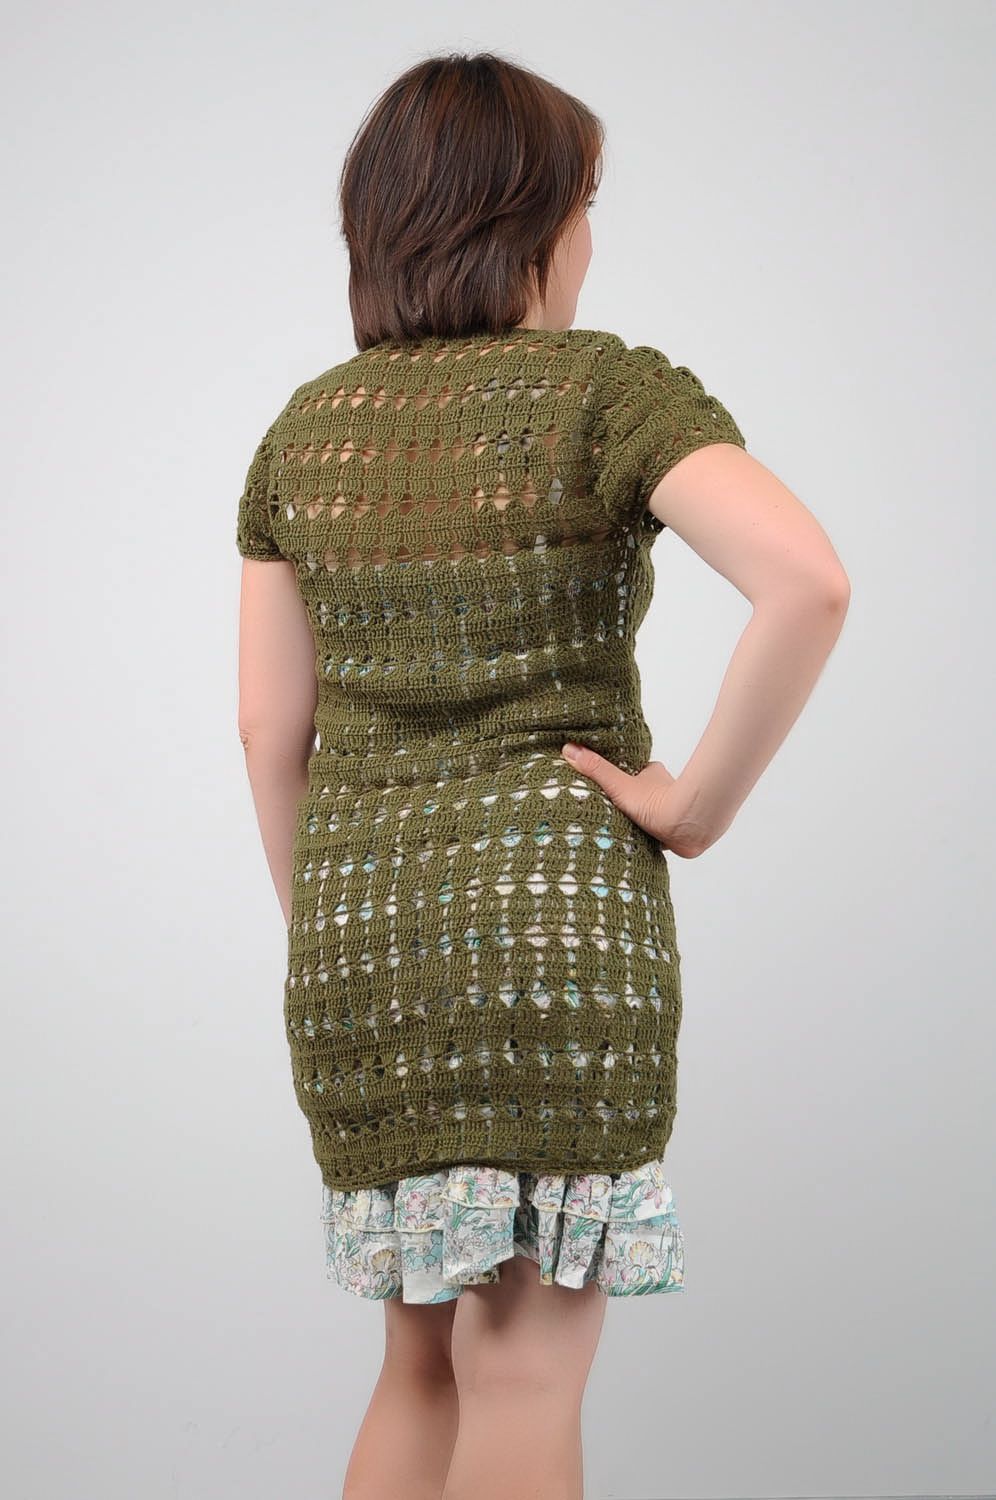 Crocheted tunic of olive color photo 2